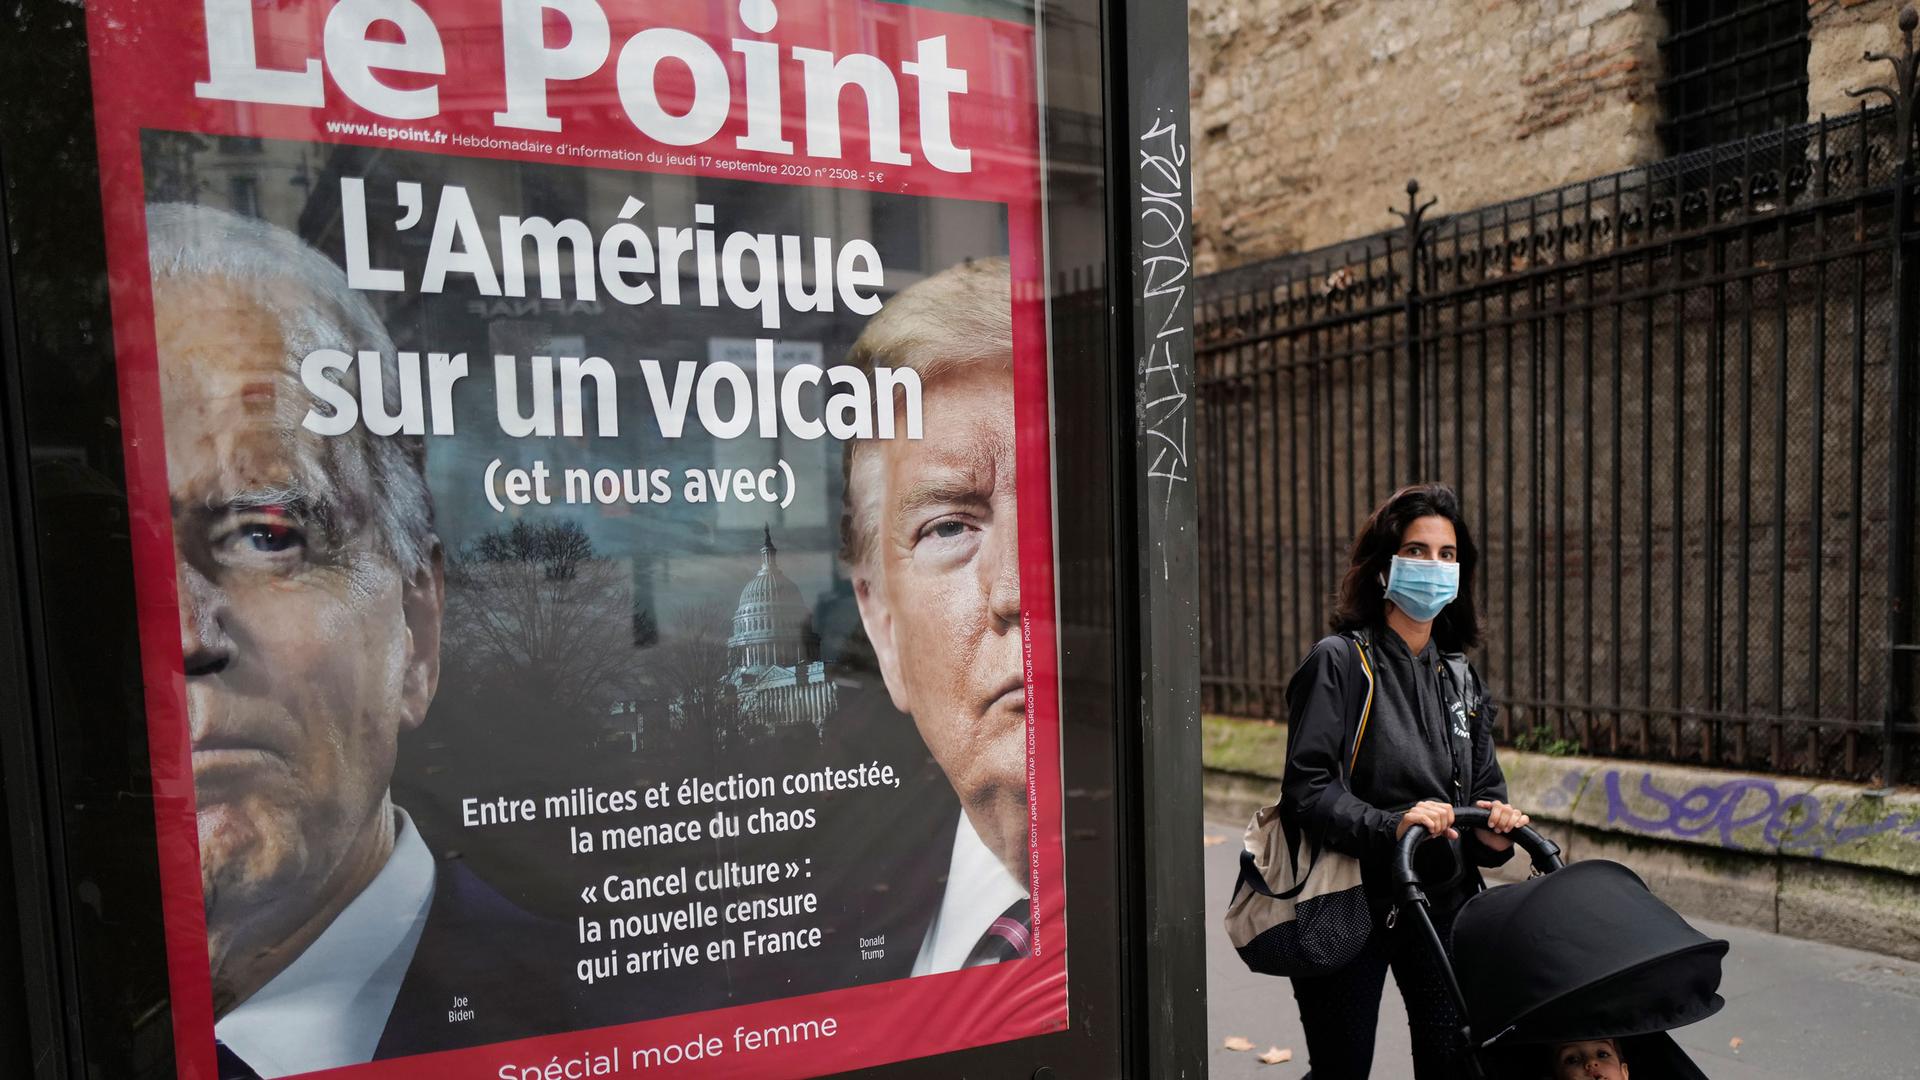 A small billboard for the French publication, Le Point, is show with the faces of Donald Trump and Joe Biden on it and a woman is shown walking past.